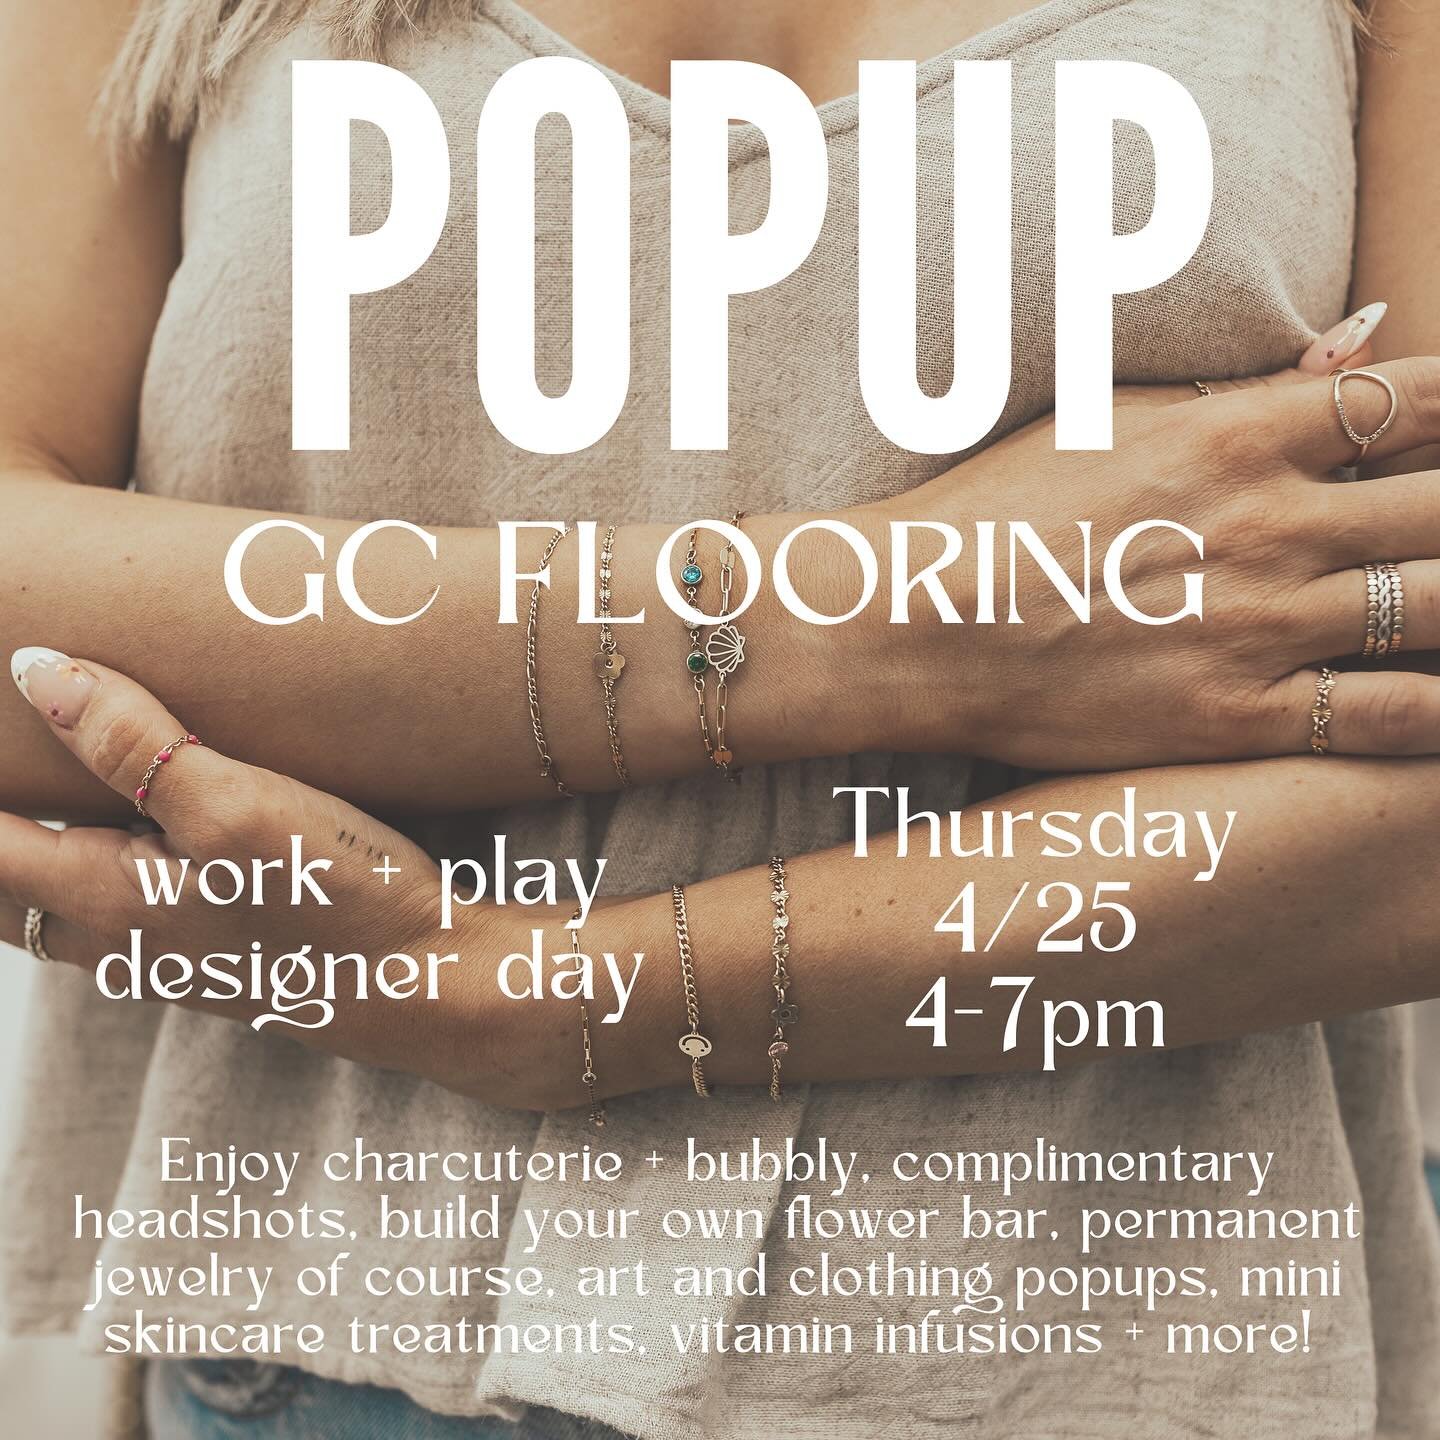 We love a good shopping experience, nothing better than when all your fav women owned, local businesses SHOW UP! ✨
Come to @gcflooring_naples on Thursday to explore their flooring collection + shop around! 
Tons of activities, vendors, snacks + sips 